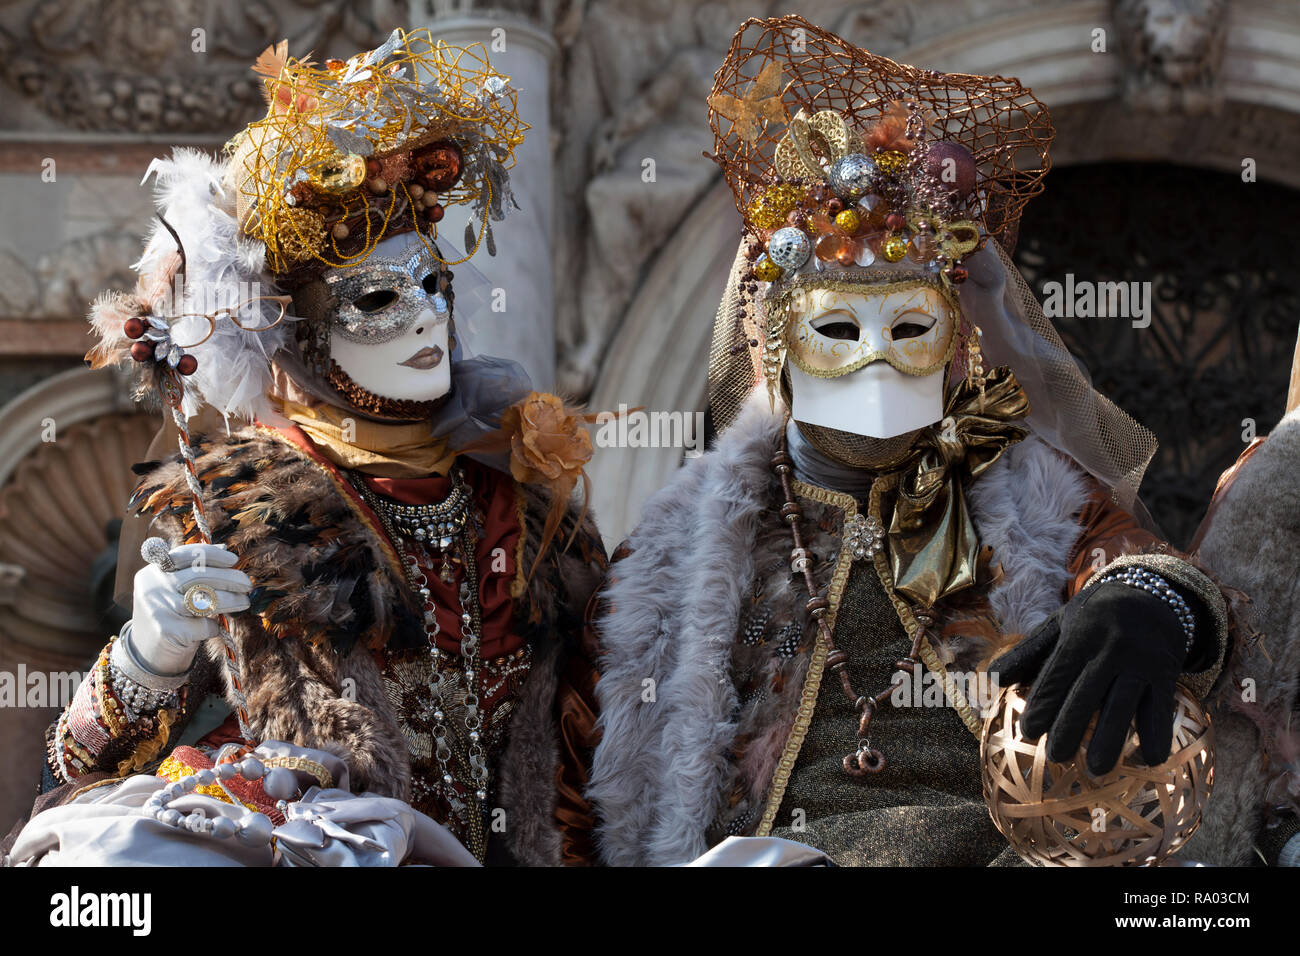 Venice Carnival masks and costumes Stock Photo